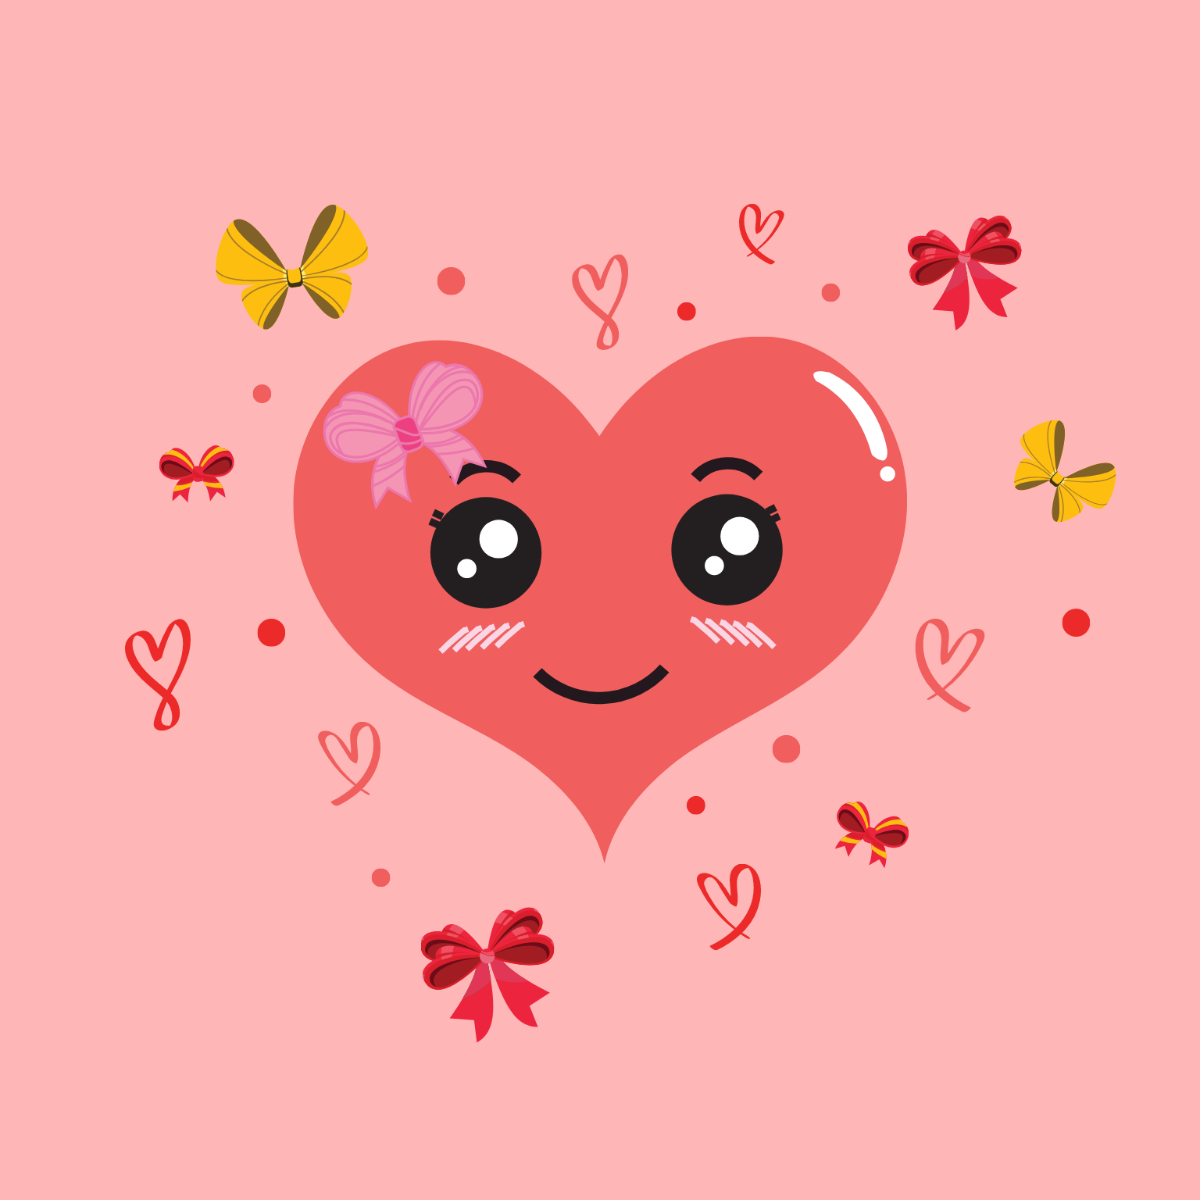 Cute Hearts for Valentine's Day Template